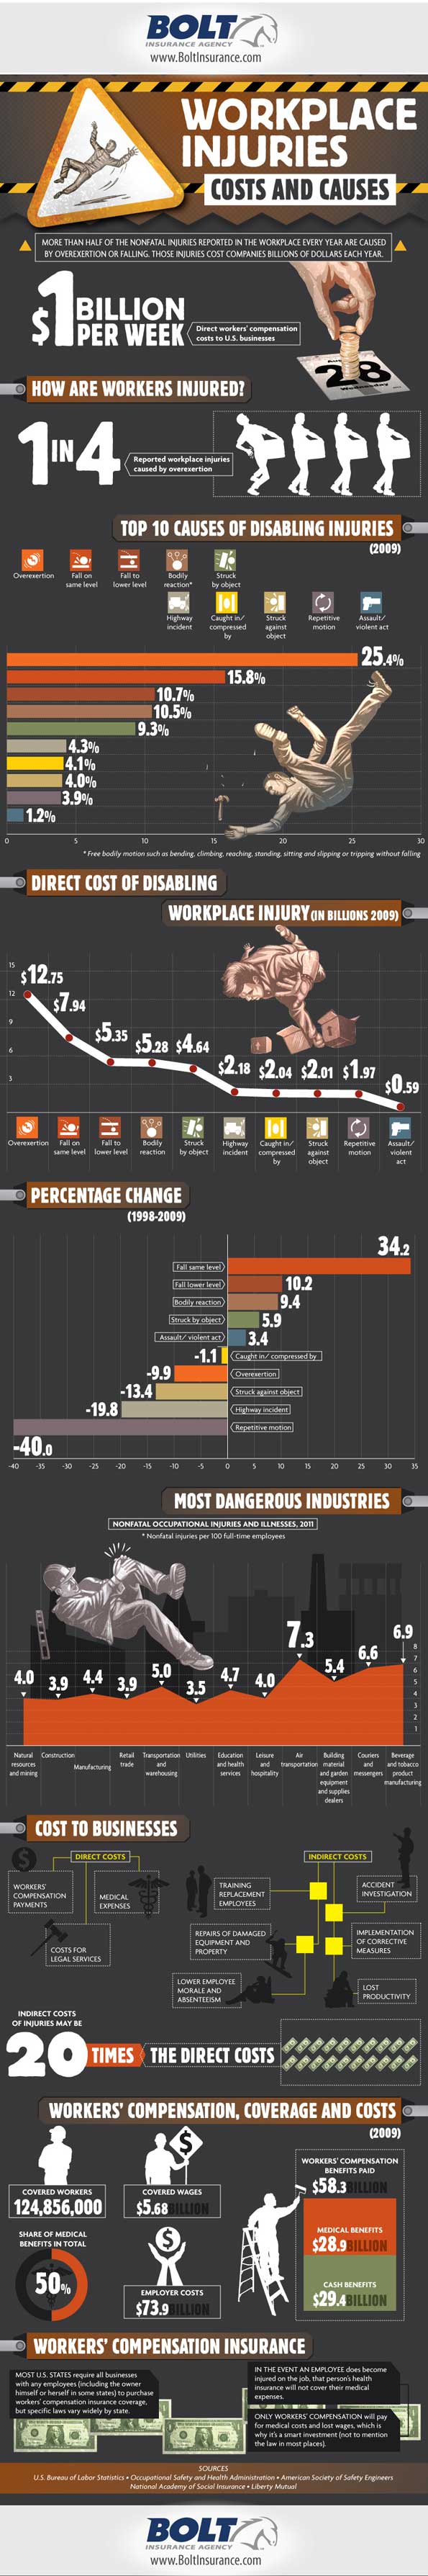 Workplace-Injuries-Infographic_1